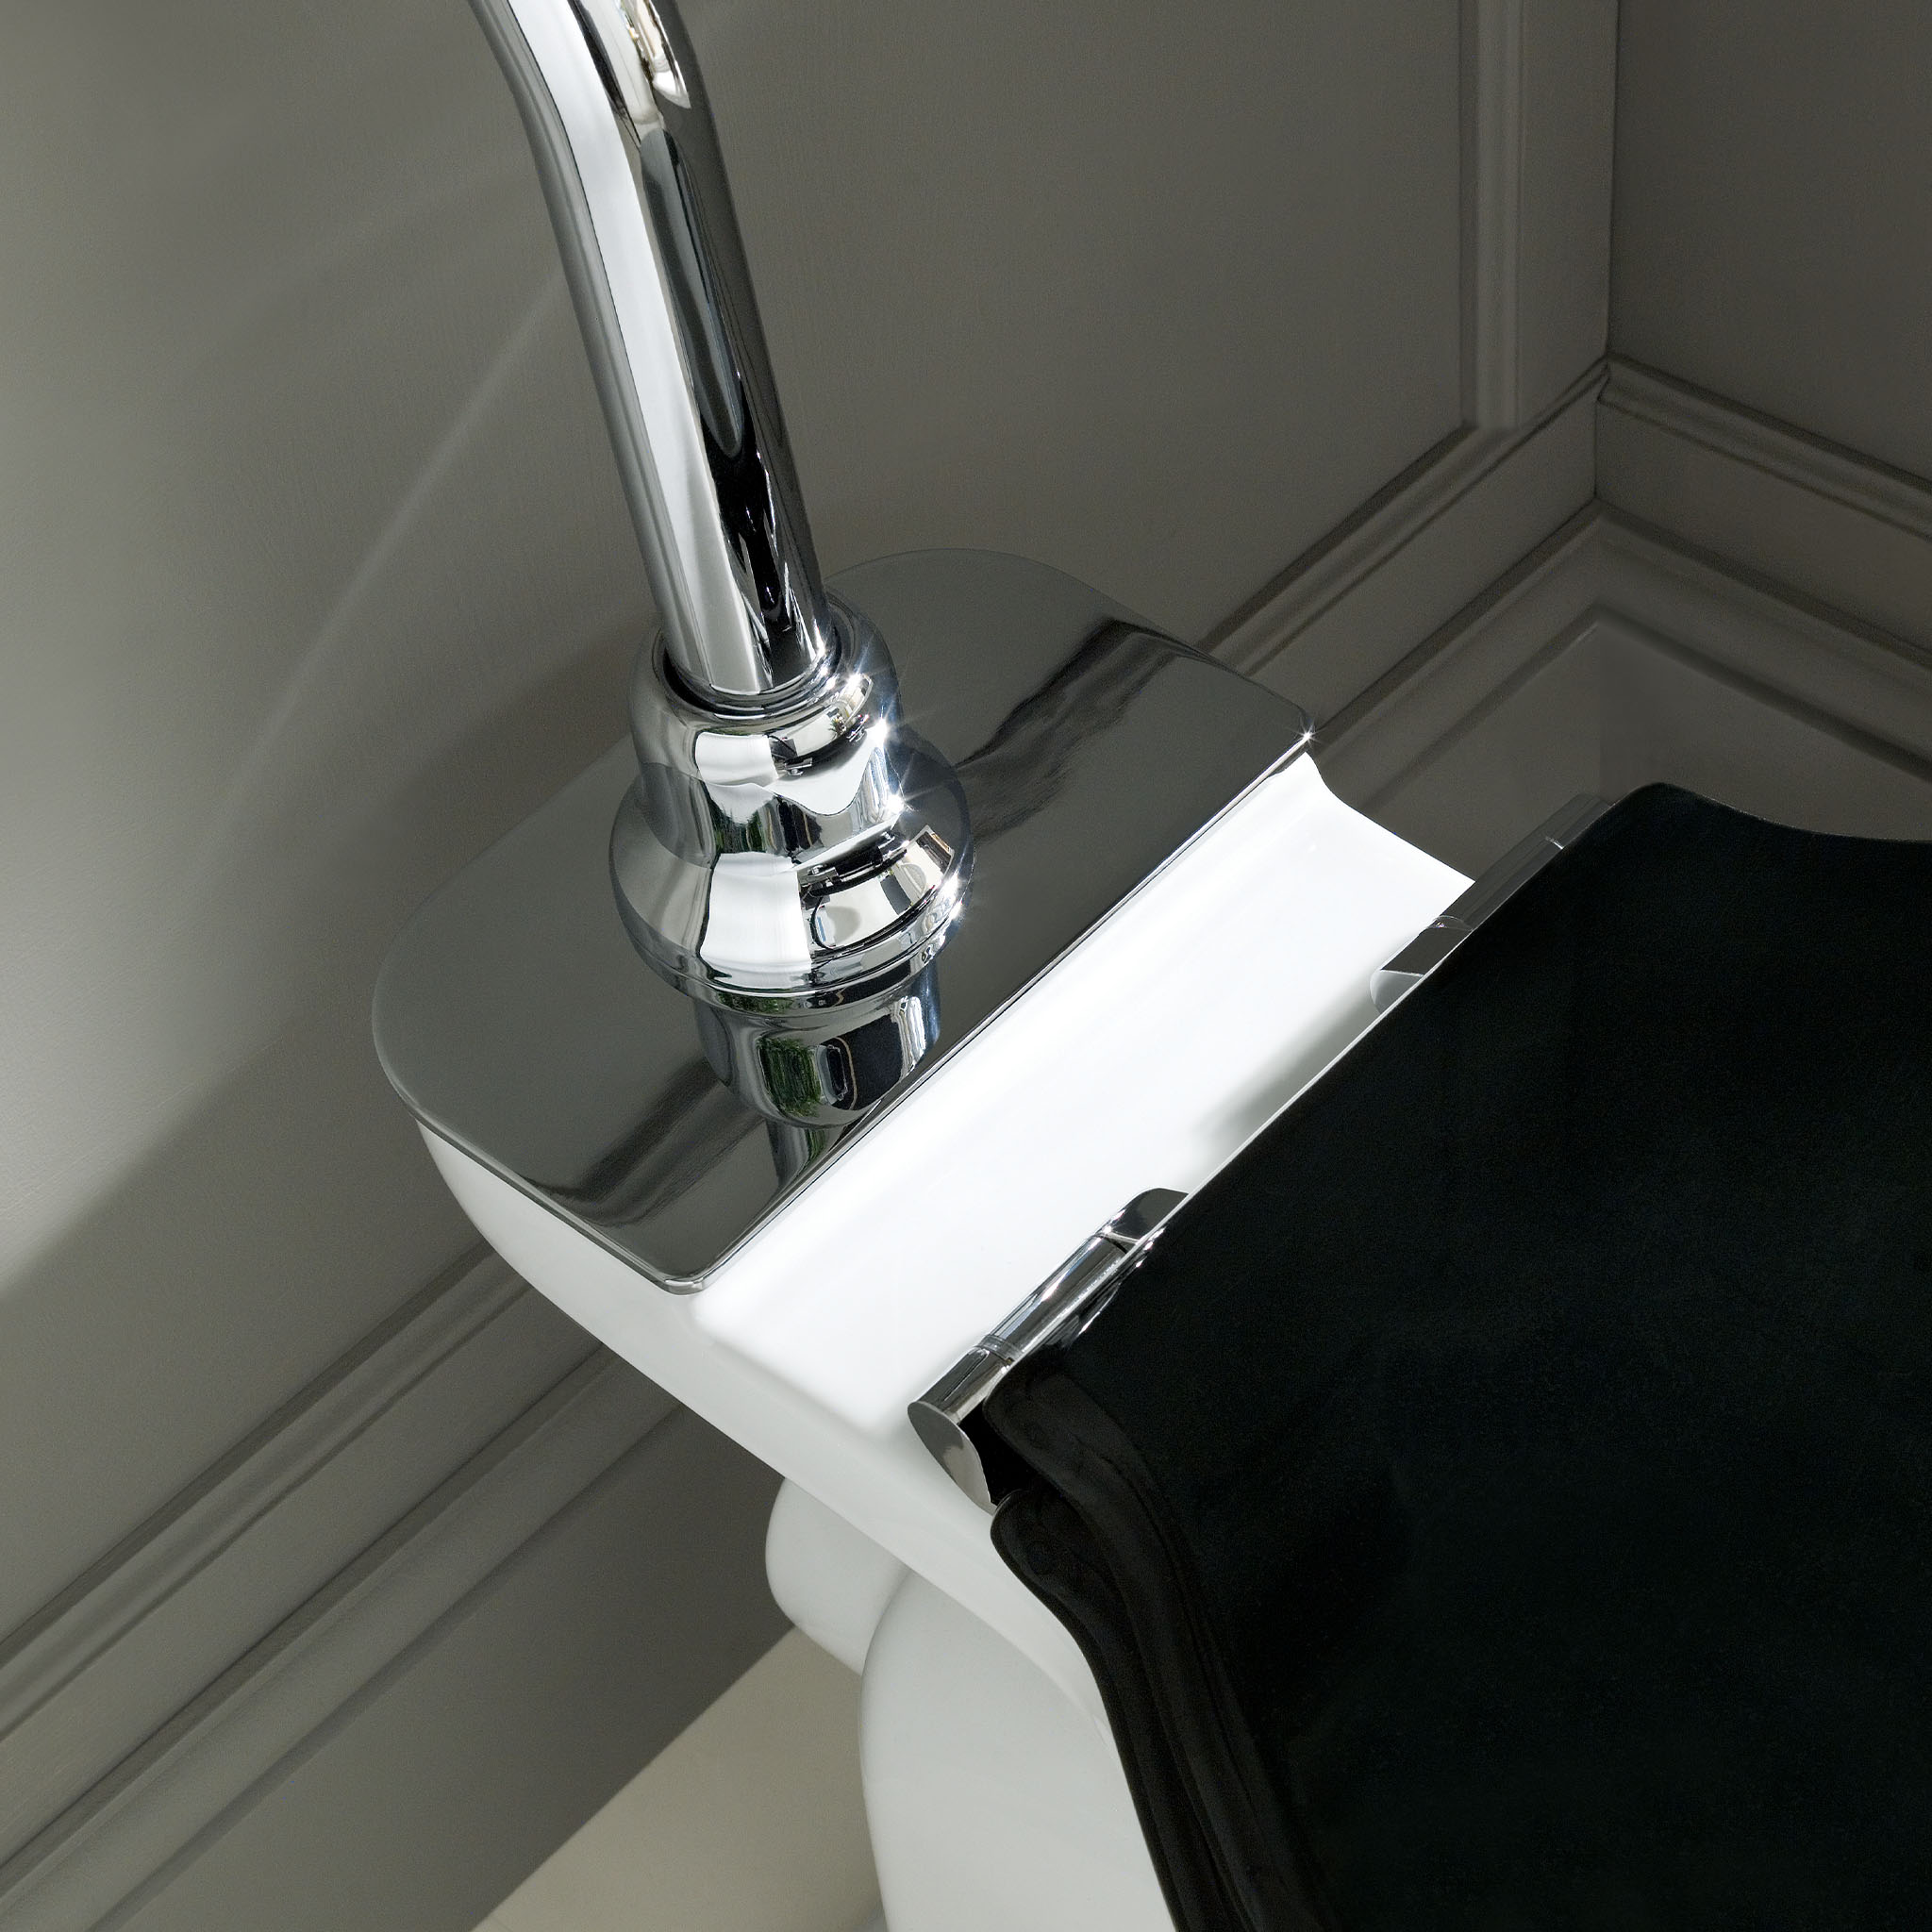 BC Designs Victrion High Level Pan & Cistern (Without Seat)